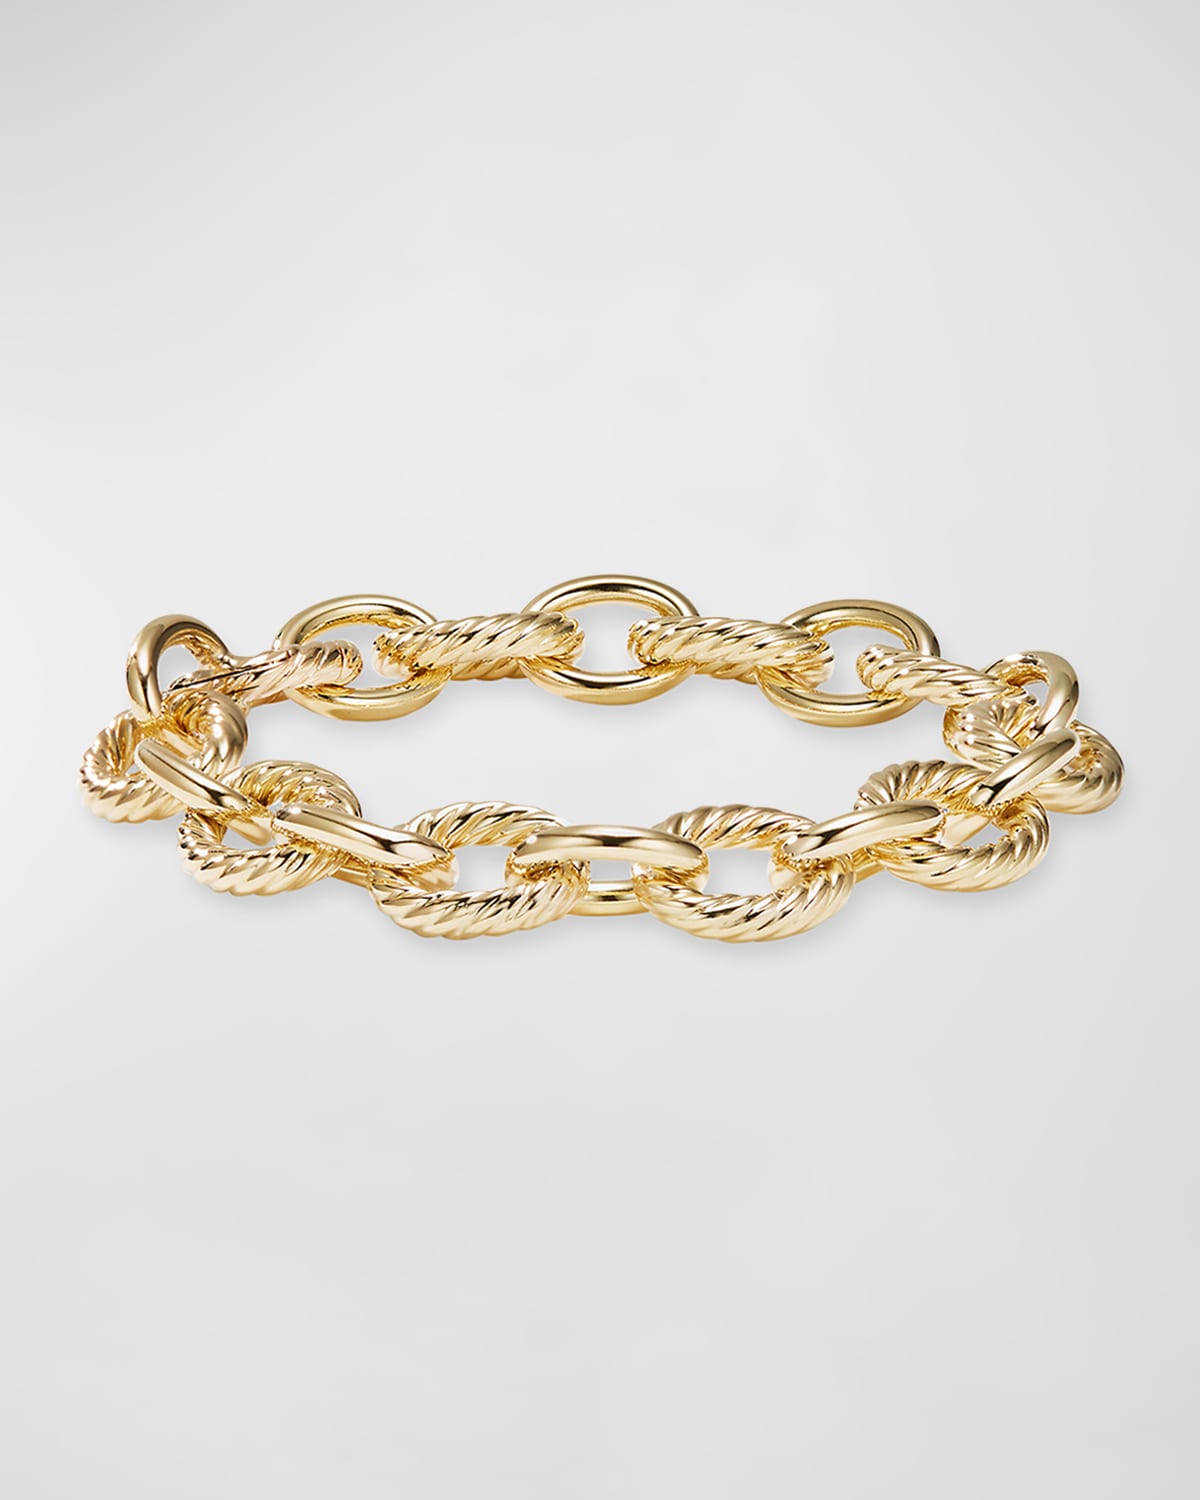 18K YELLOW GOLD ROPE BRACELET 7.5 INCHES BRAIDED INFINITE FACETED ALTERNATE LINK